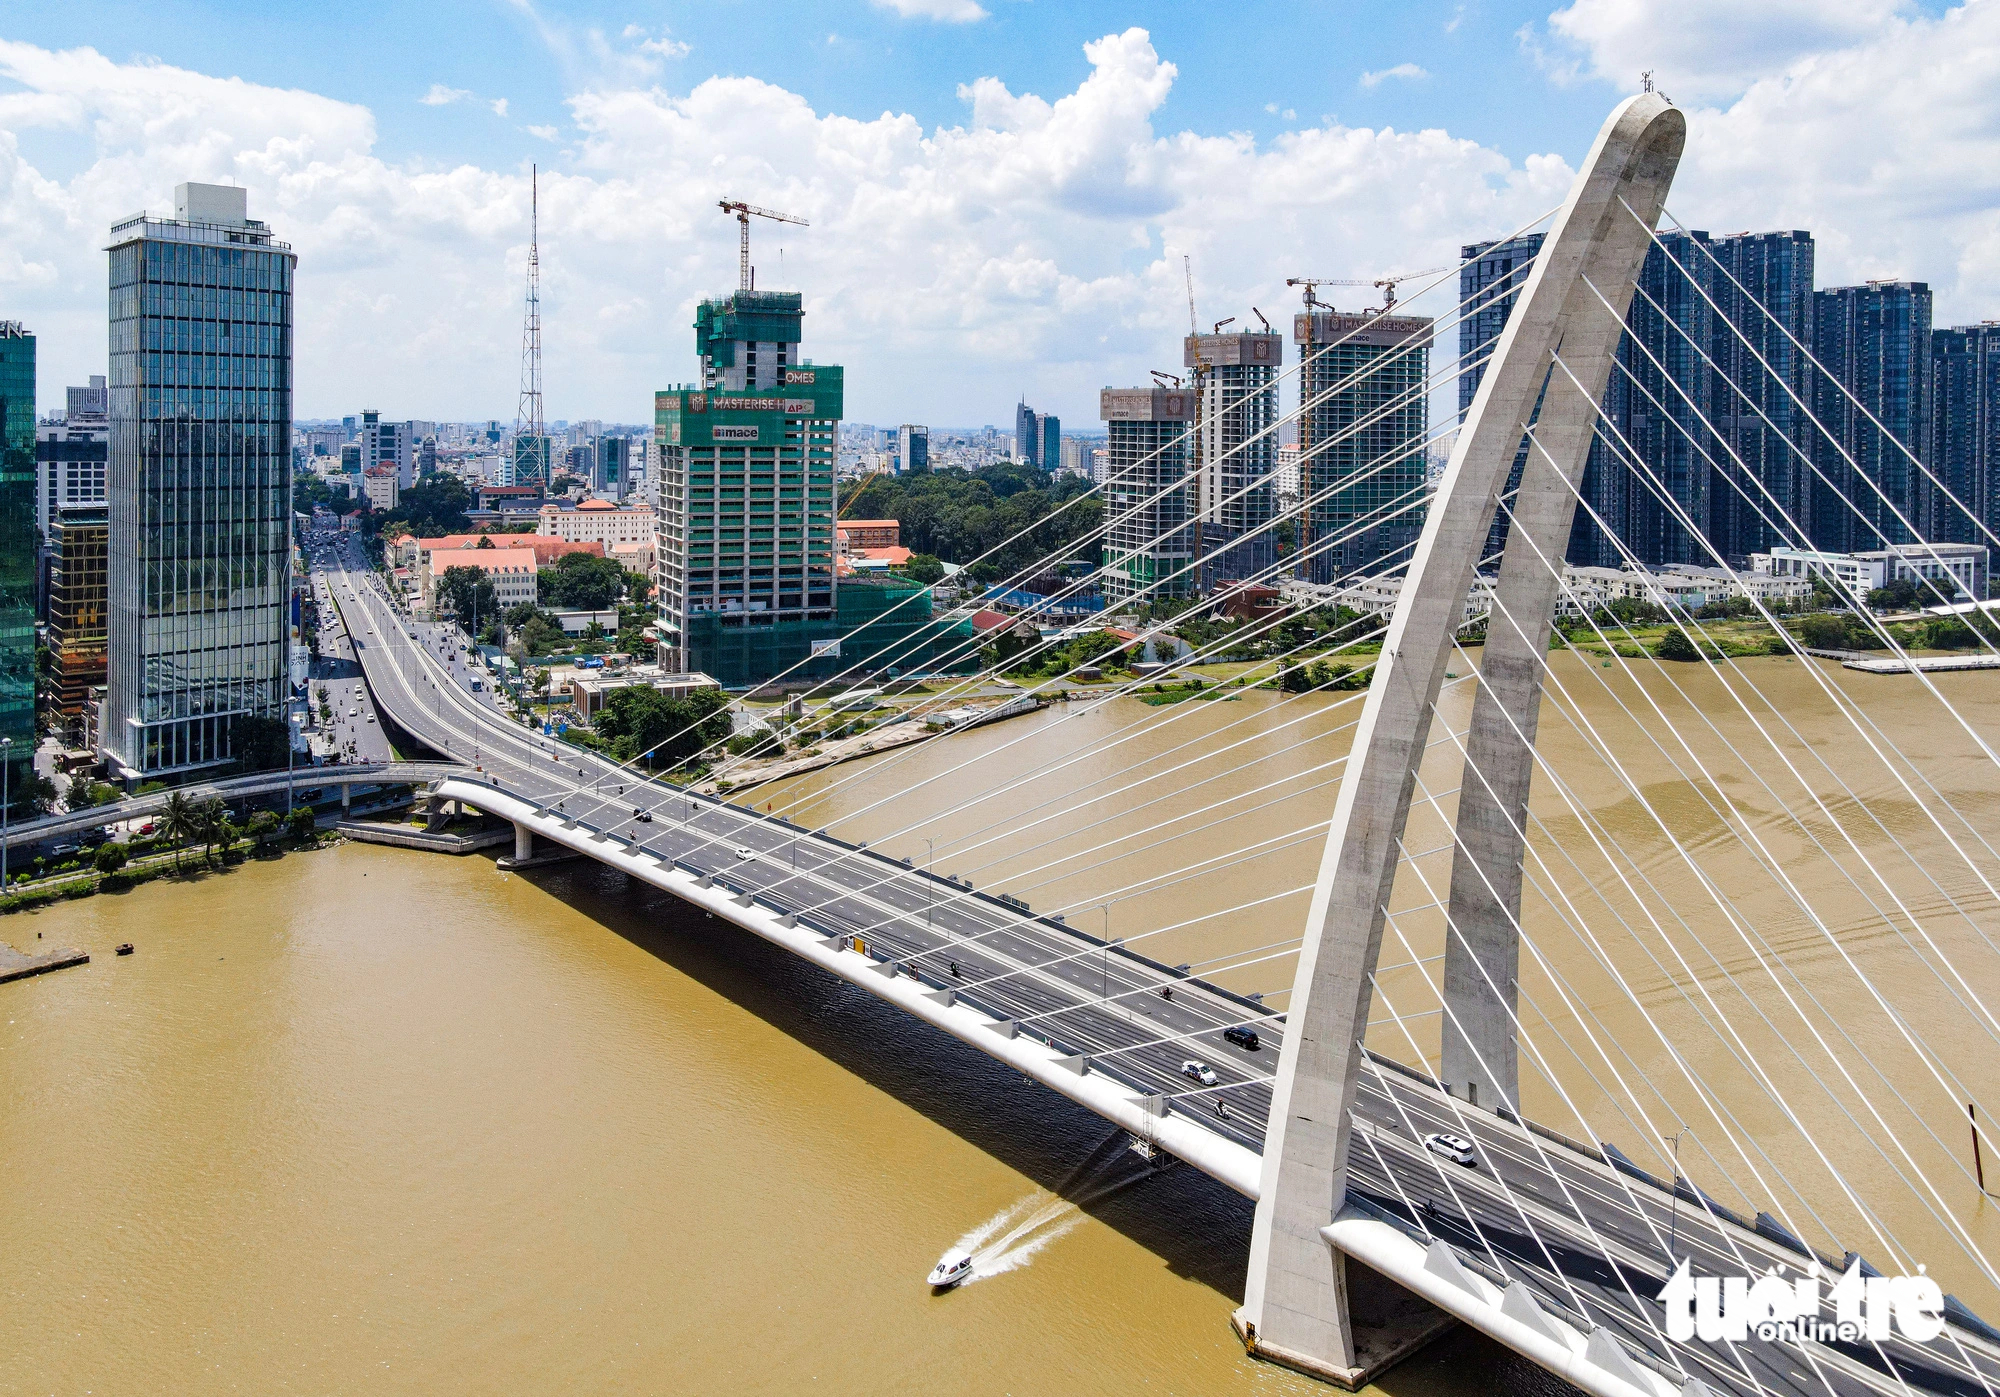 Ba Son Bridge, formerly known as Thu Thiem 2 Bridge, spans over the Saigon River and links District 1 with the Thu Thiem urban area in Thu Duc City, under Ho Chi Minh City. Photo: Tuoi Tre